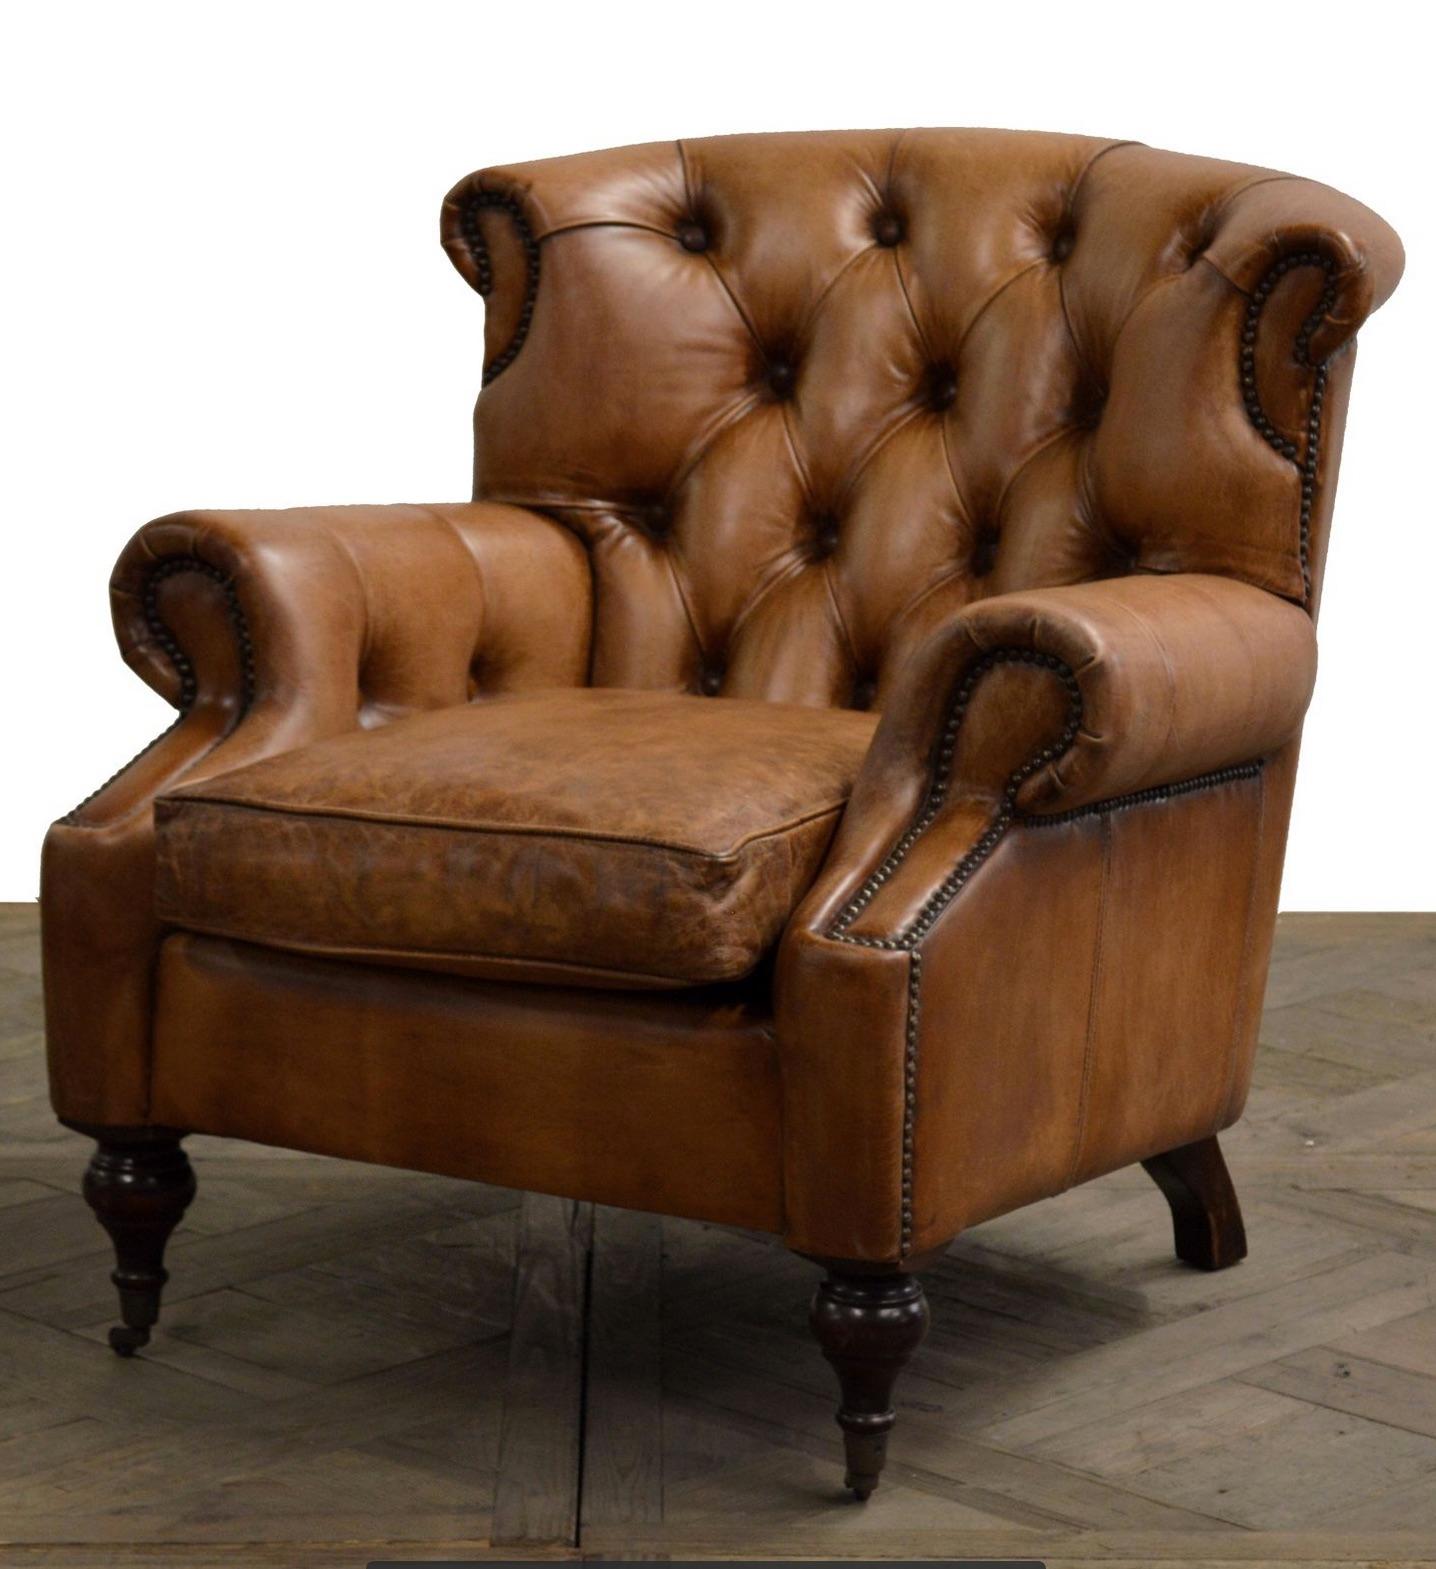 Leather Four English Georgian Style Club Chair with Tufted Back, Lovely Hand Worn Patina For Sale